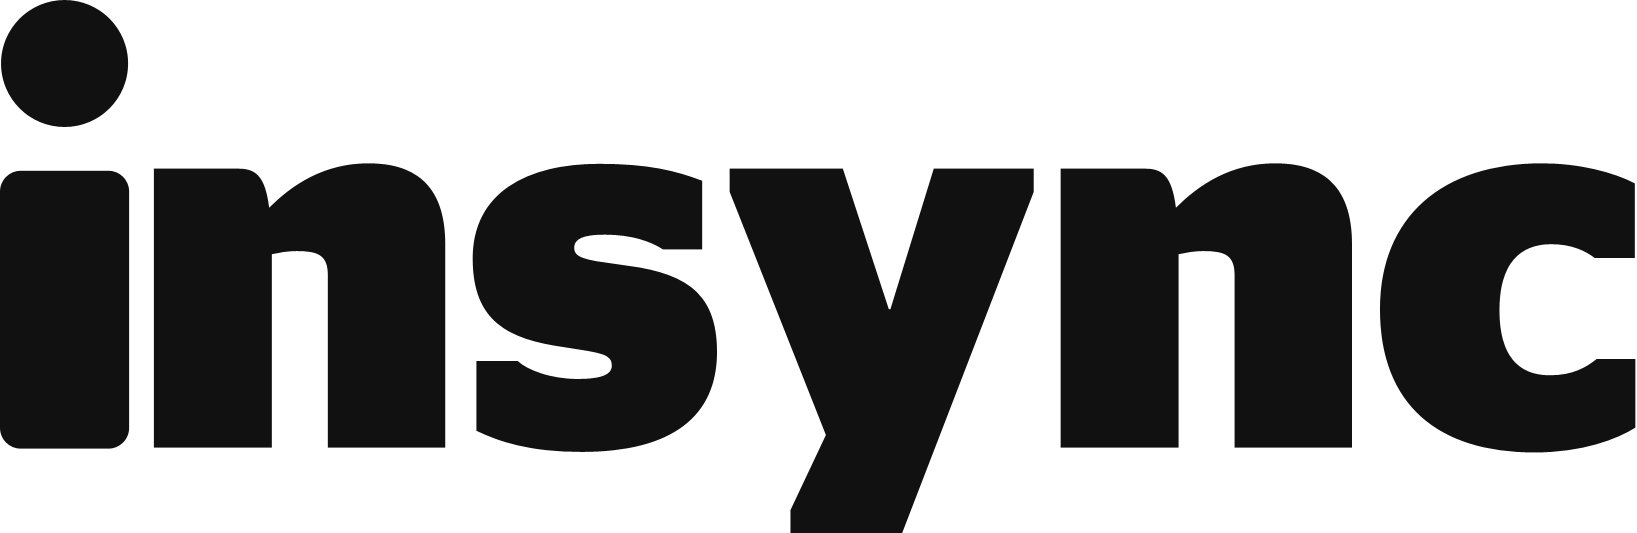 Get More Promo Codes And Deal At Insync